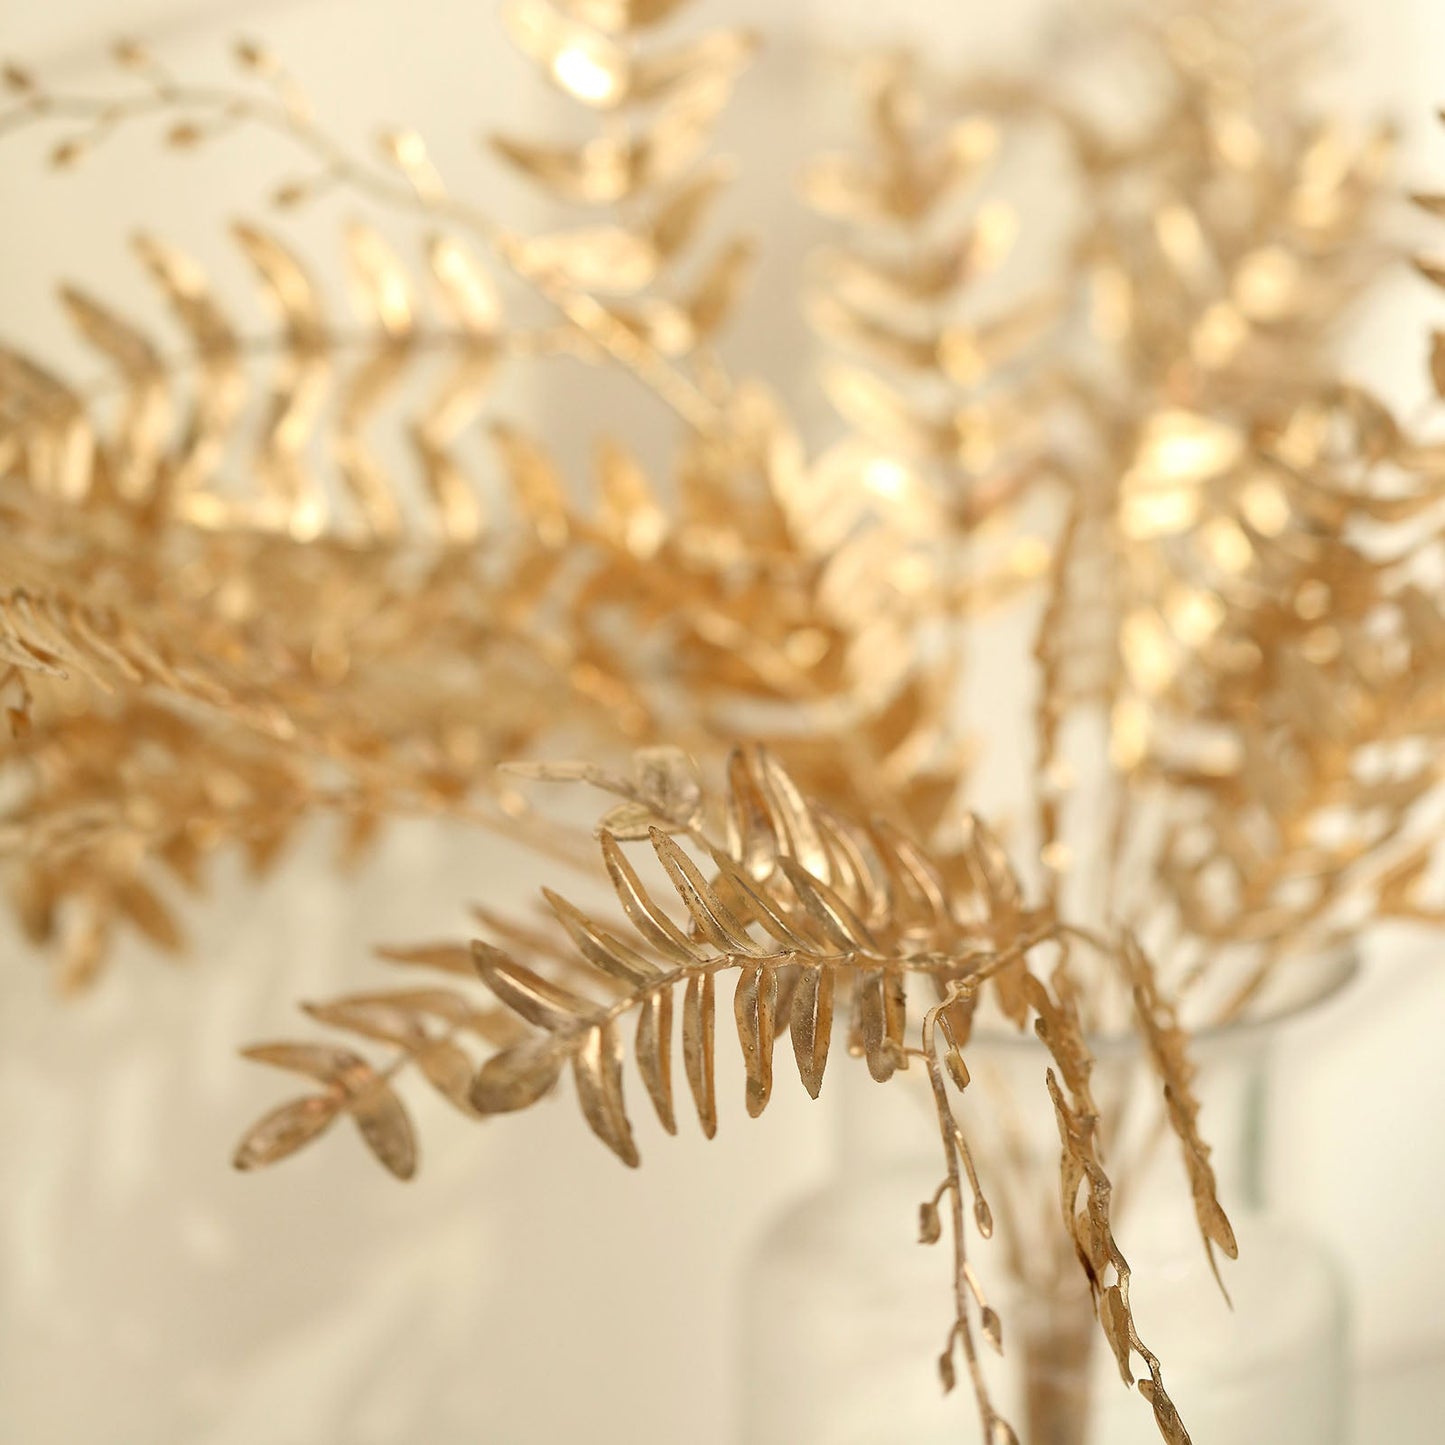 2 Pack Metallic Gold Artificial Fern Leaf Branches, Faux Decorative Bouquets 21"